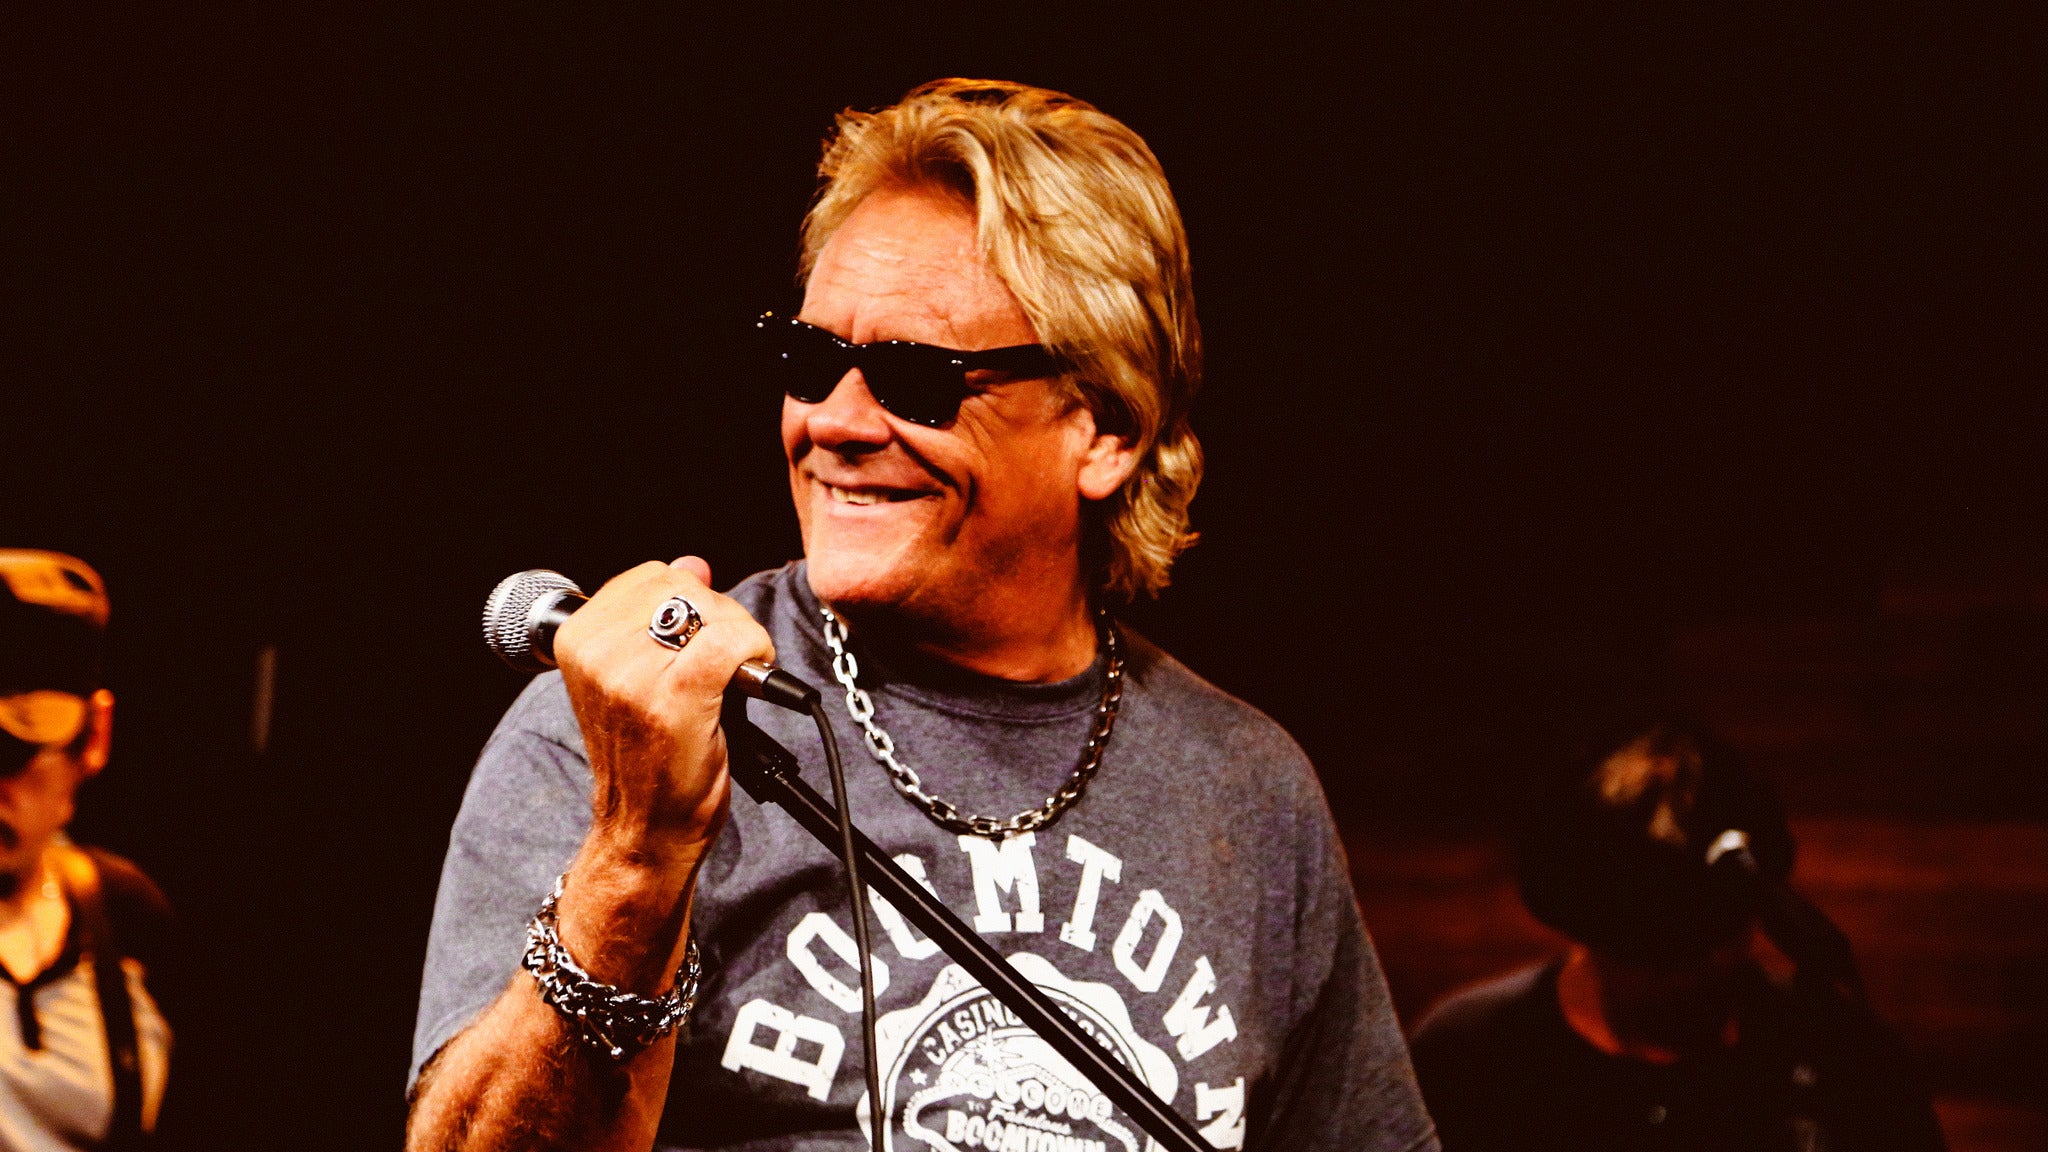 Brian Howe Former Lead Singer Of Bad Company in Jackpot promo photo for Mychoice presale offer code